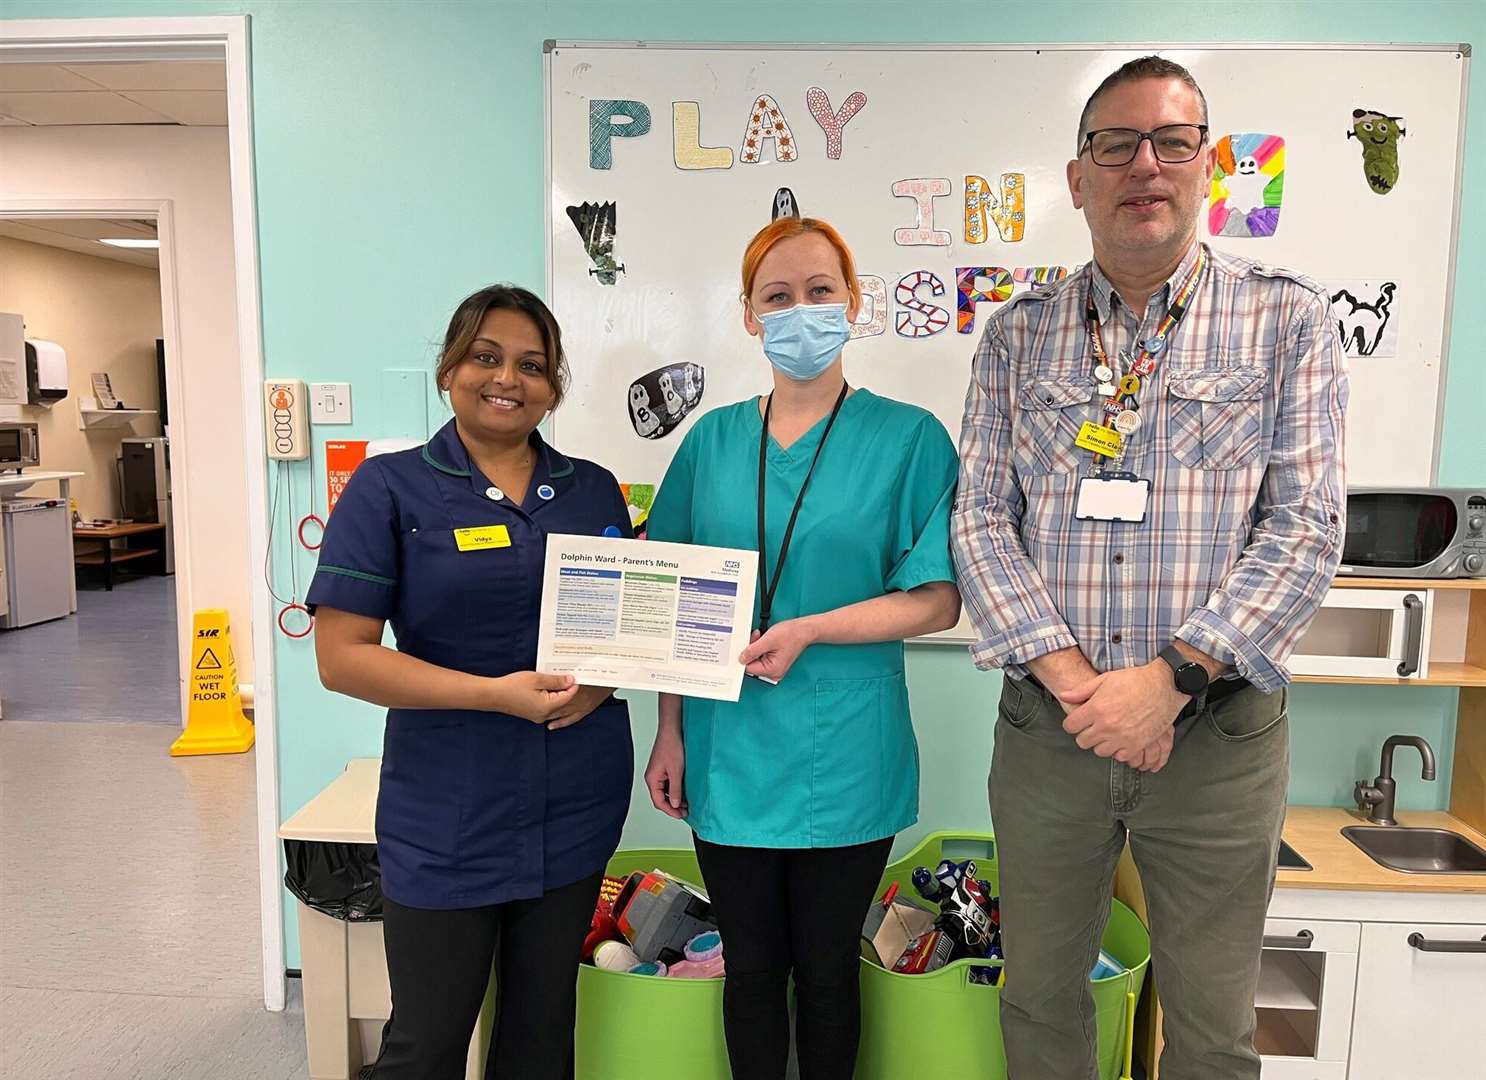 From left: Vidya Pundit-Dermody, catering team assistant, Karini Eksta, and Simon Clark, senior facilities manager for catering. Picture: Medway NHS Foundation Trust